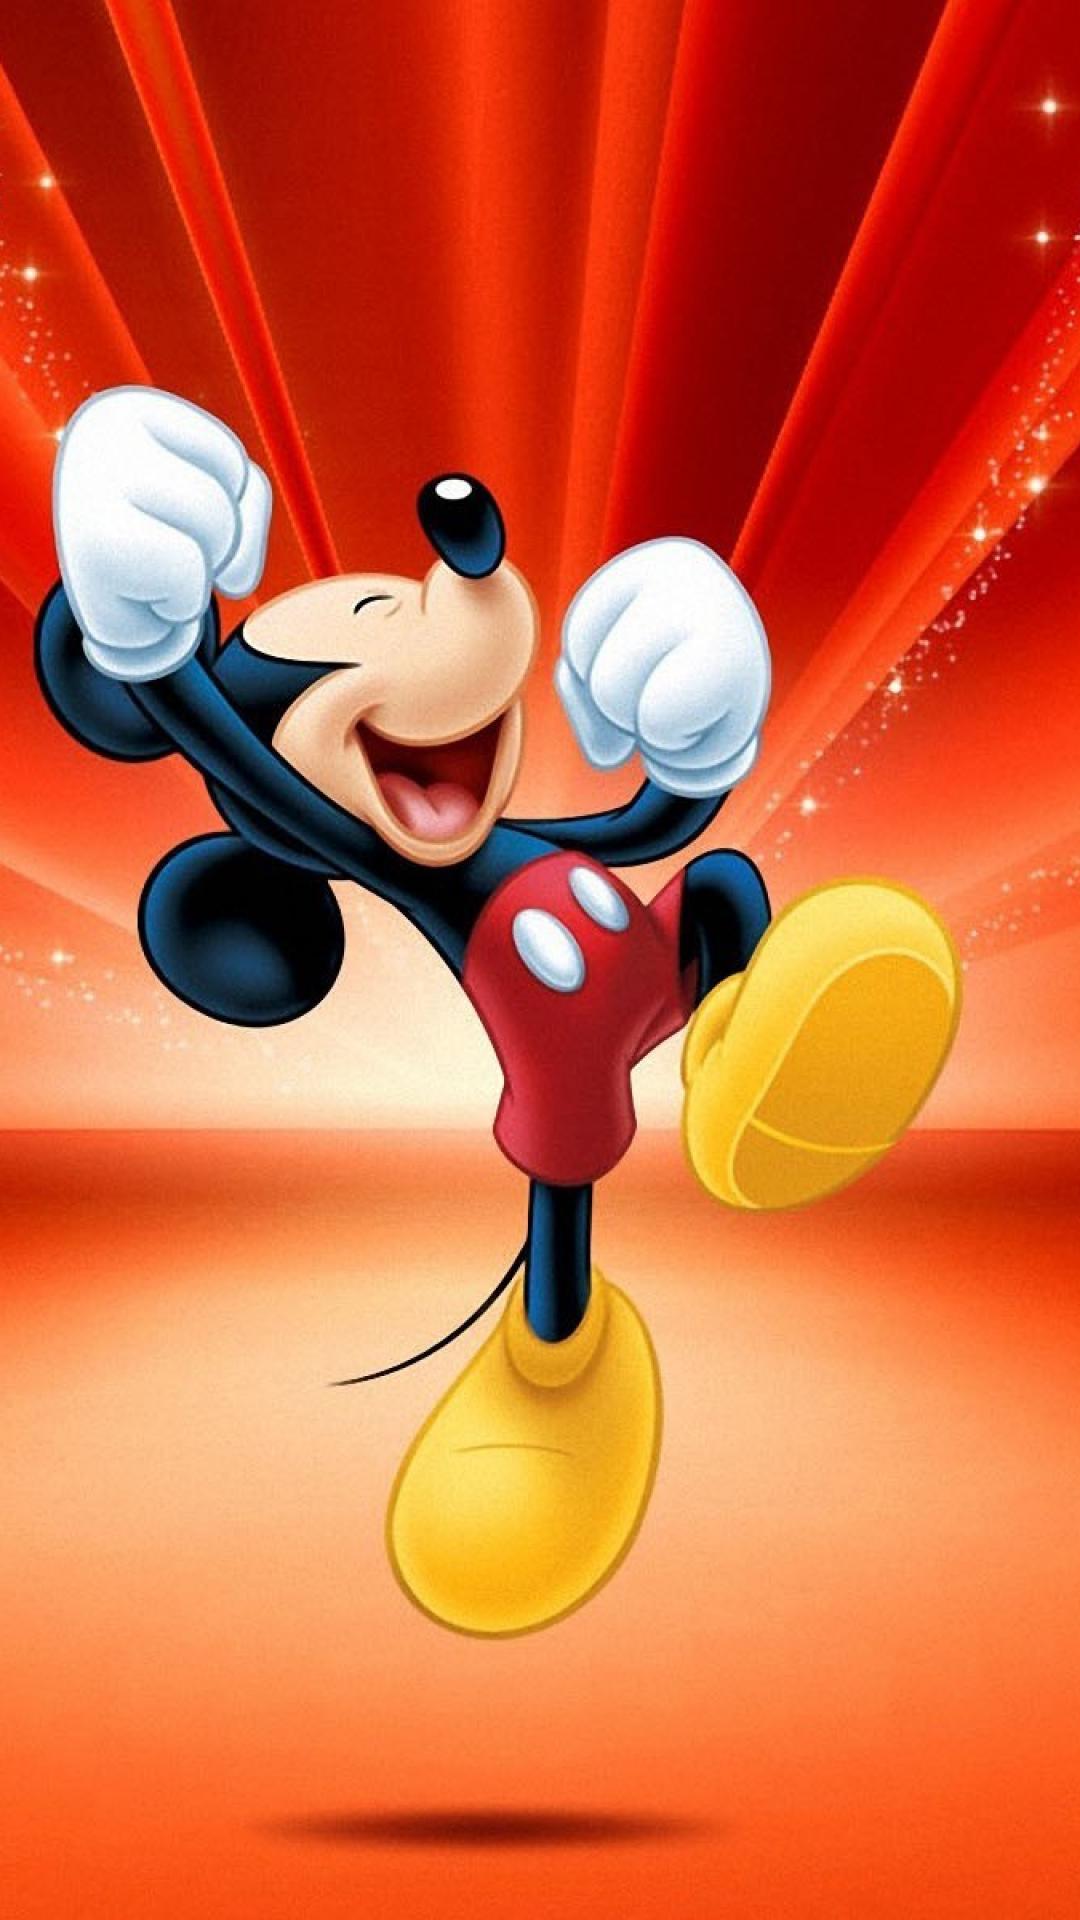 Mickey Mouse Wallpaper HD Cartoon 4K Wallpapers Images and Background   Wallpapers Den